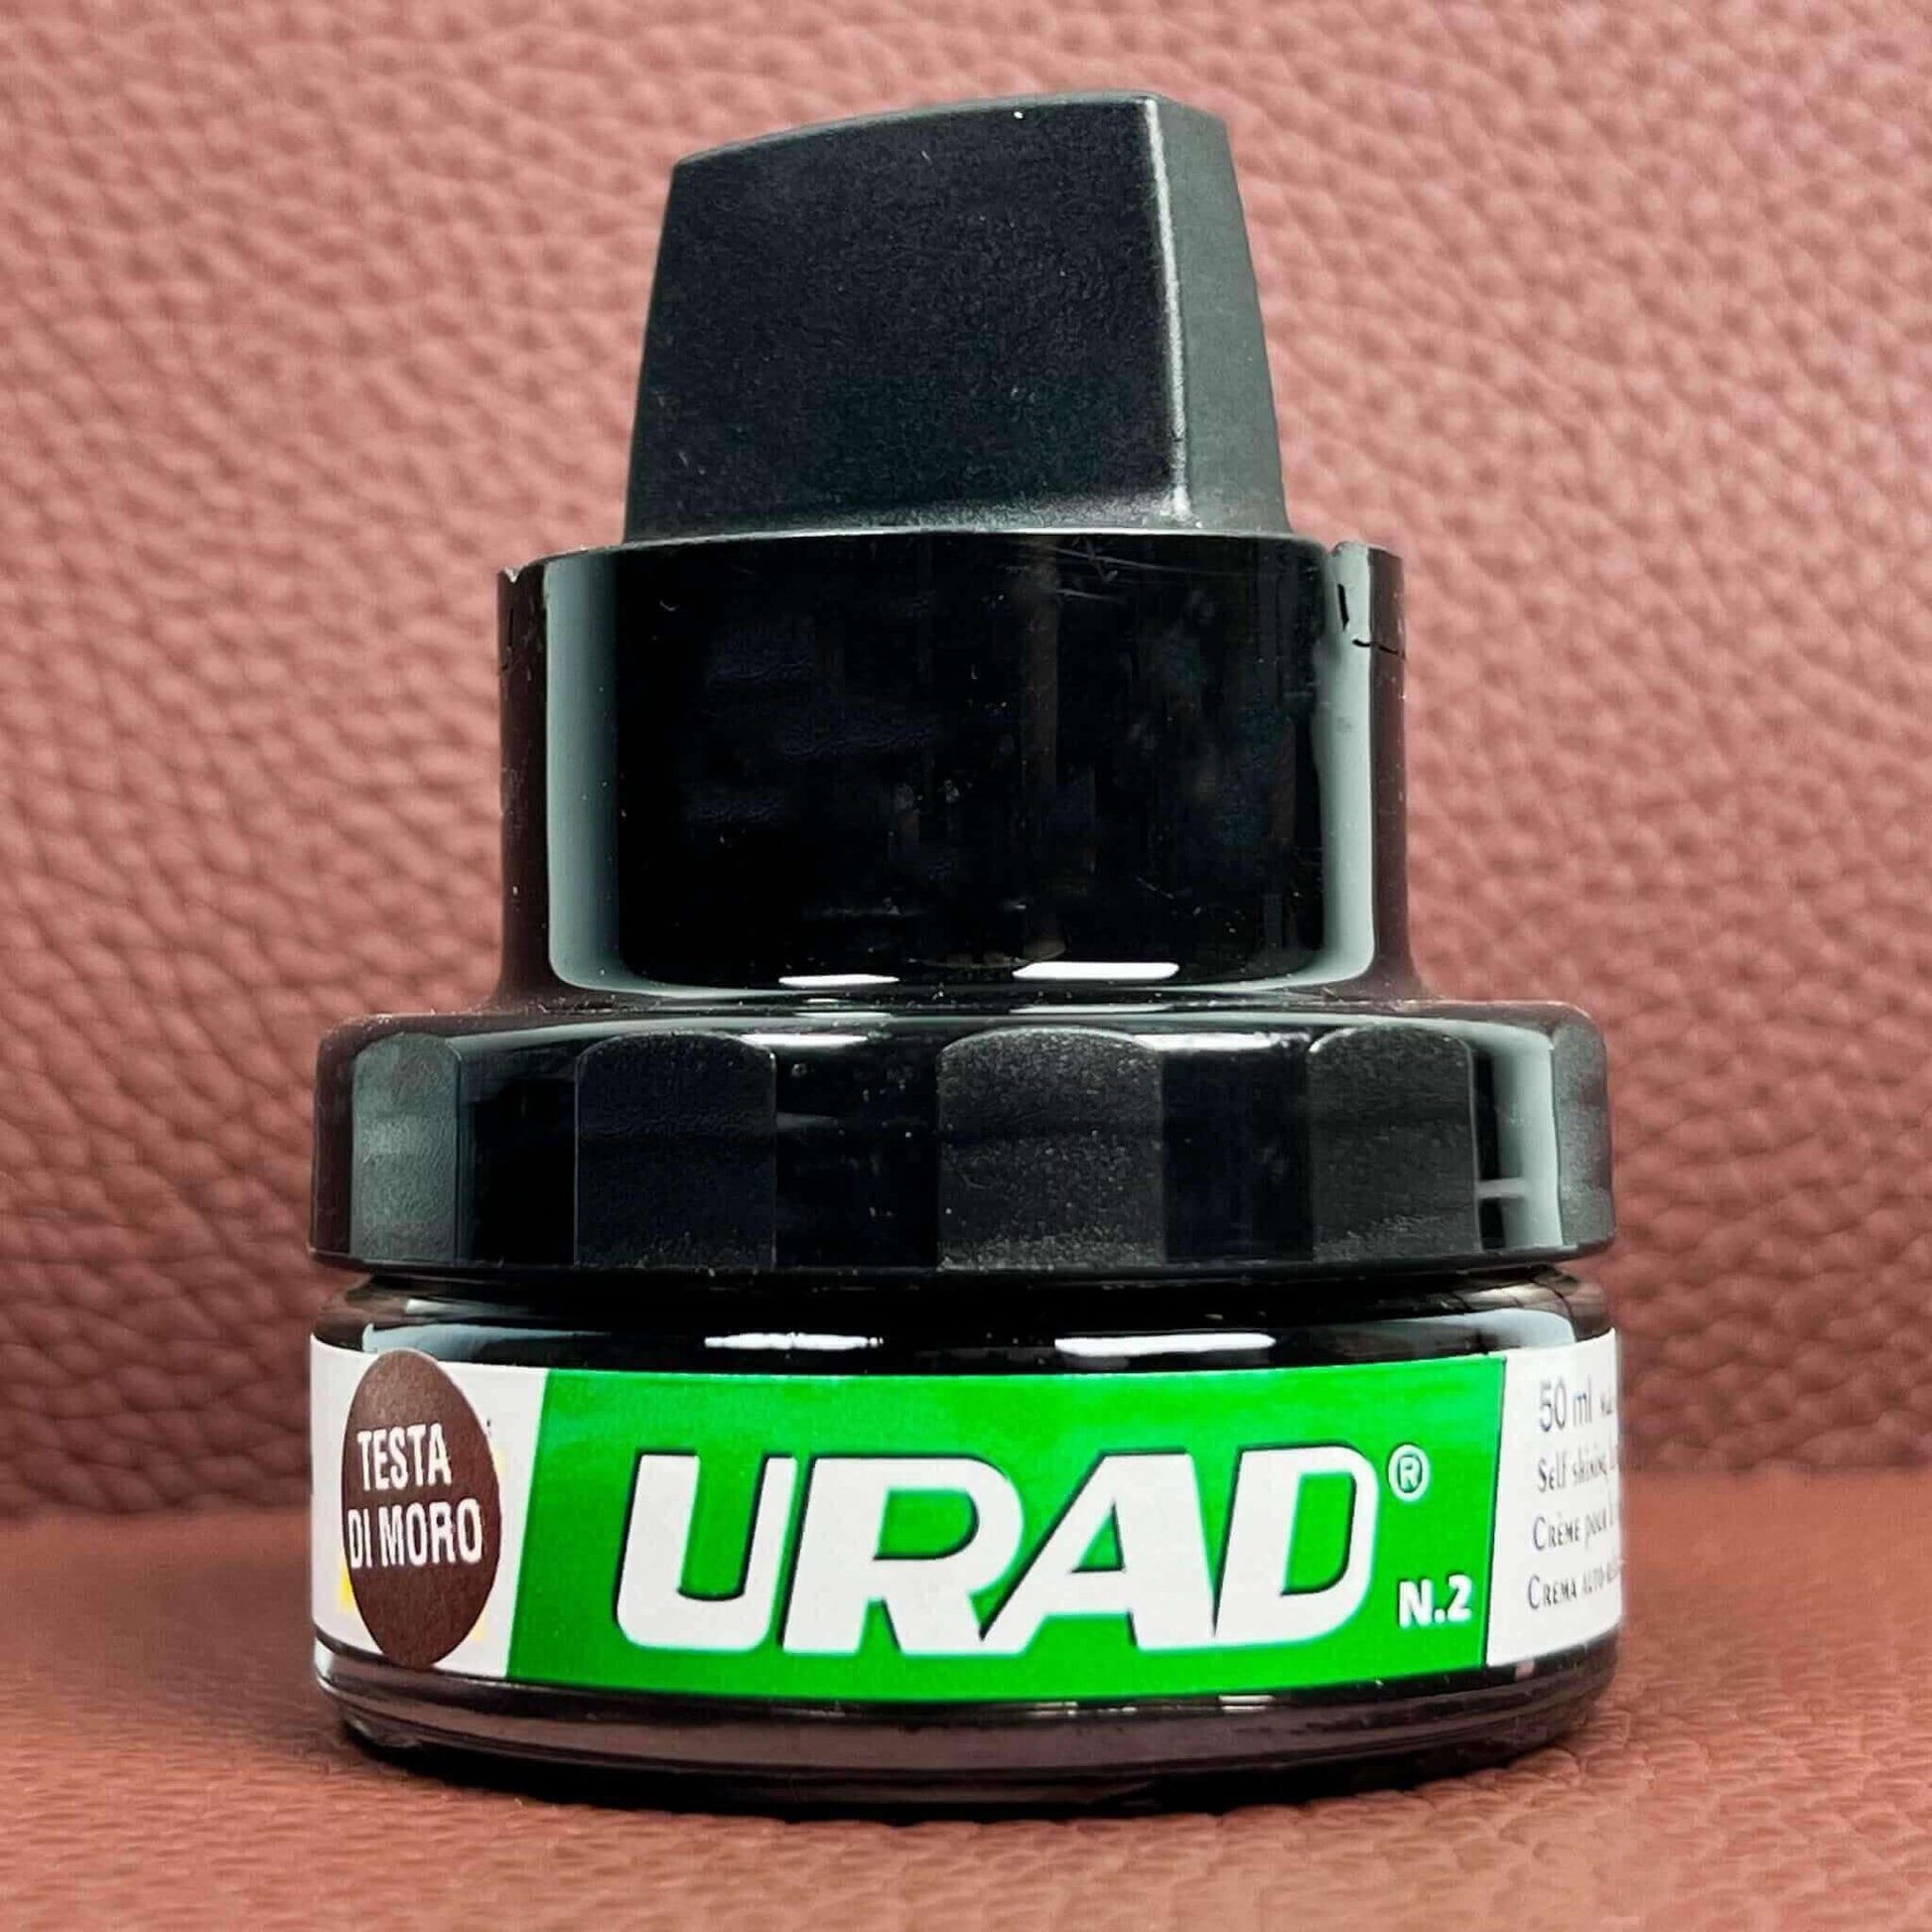 When it comes to finding the best leather cream for furniture, Urad is a top choice for those looking to keep their leather chairs and sofas in pristine condition.